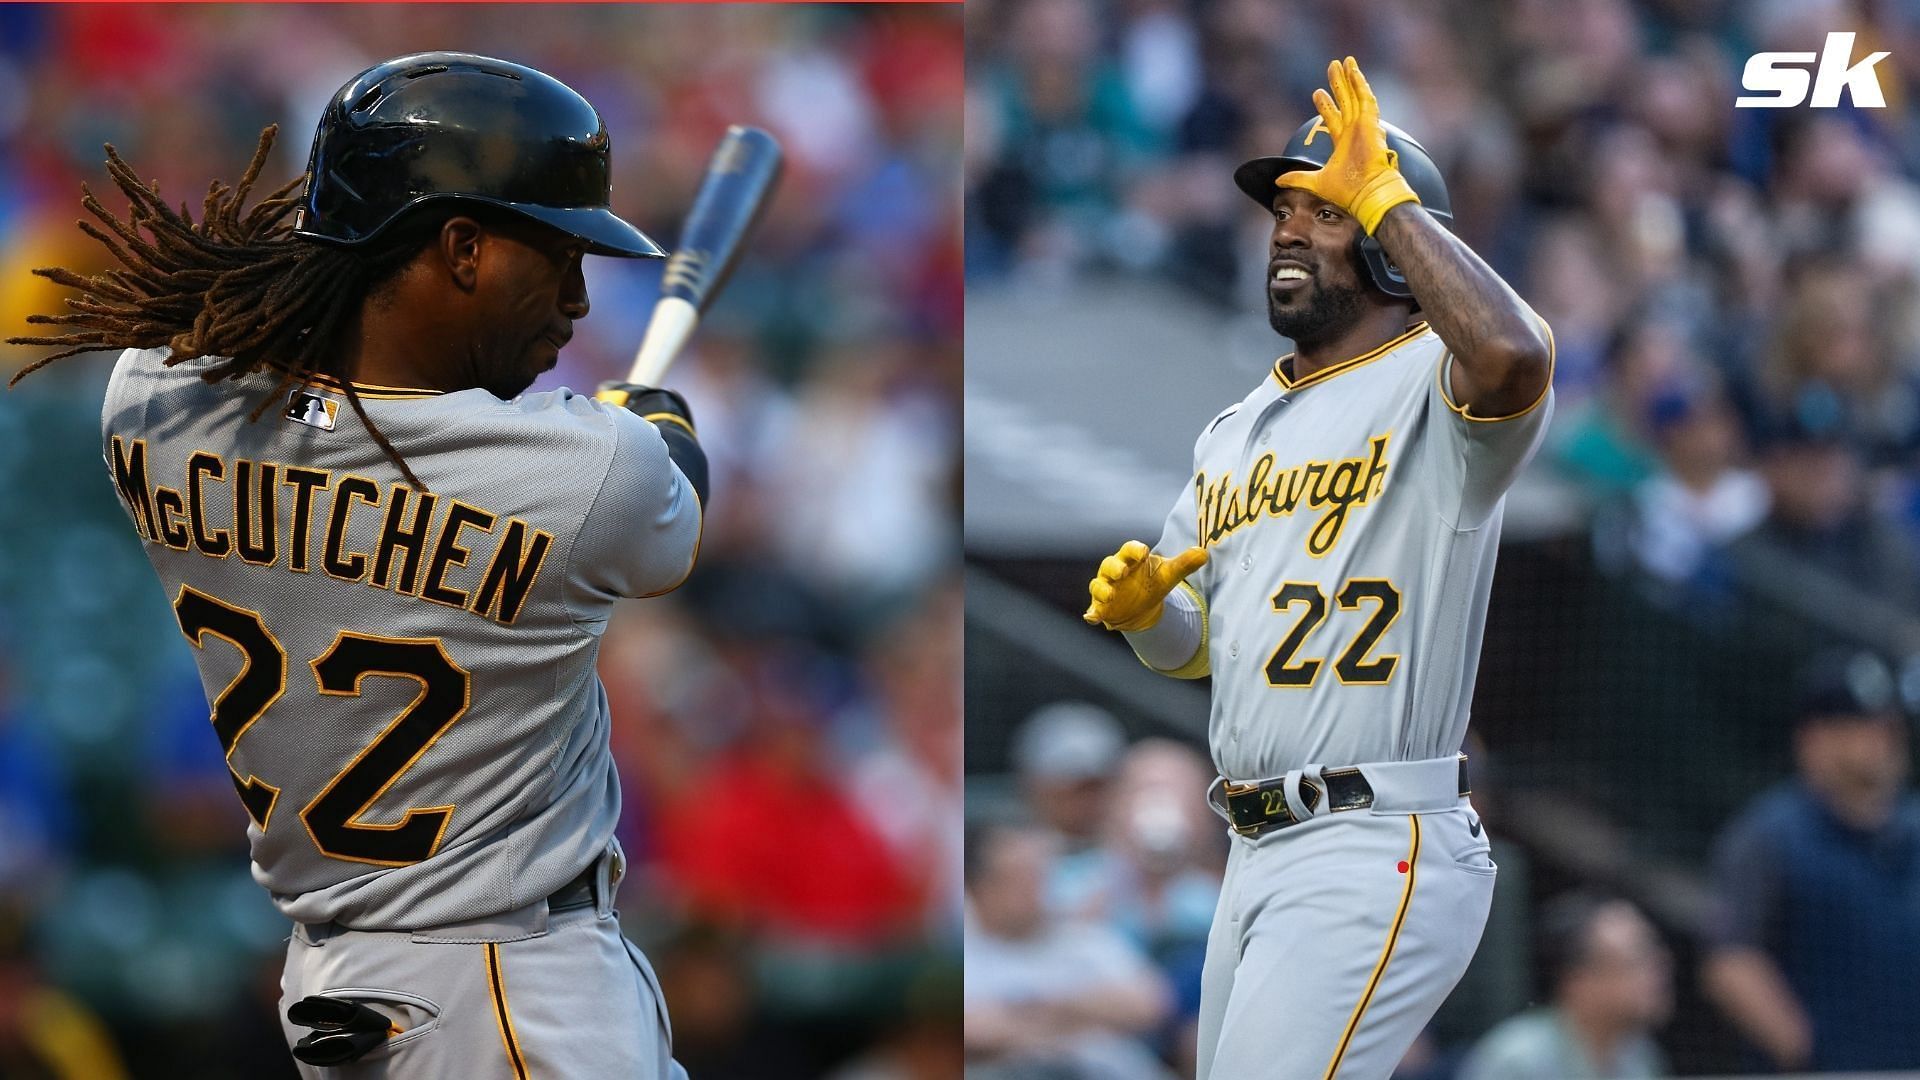 Andrew McCutchen had a special gift for the young fan who caught his 300th home run ball